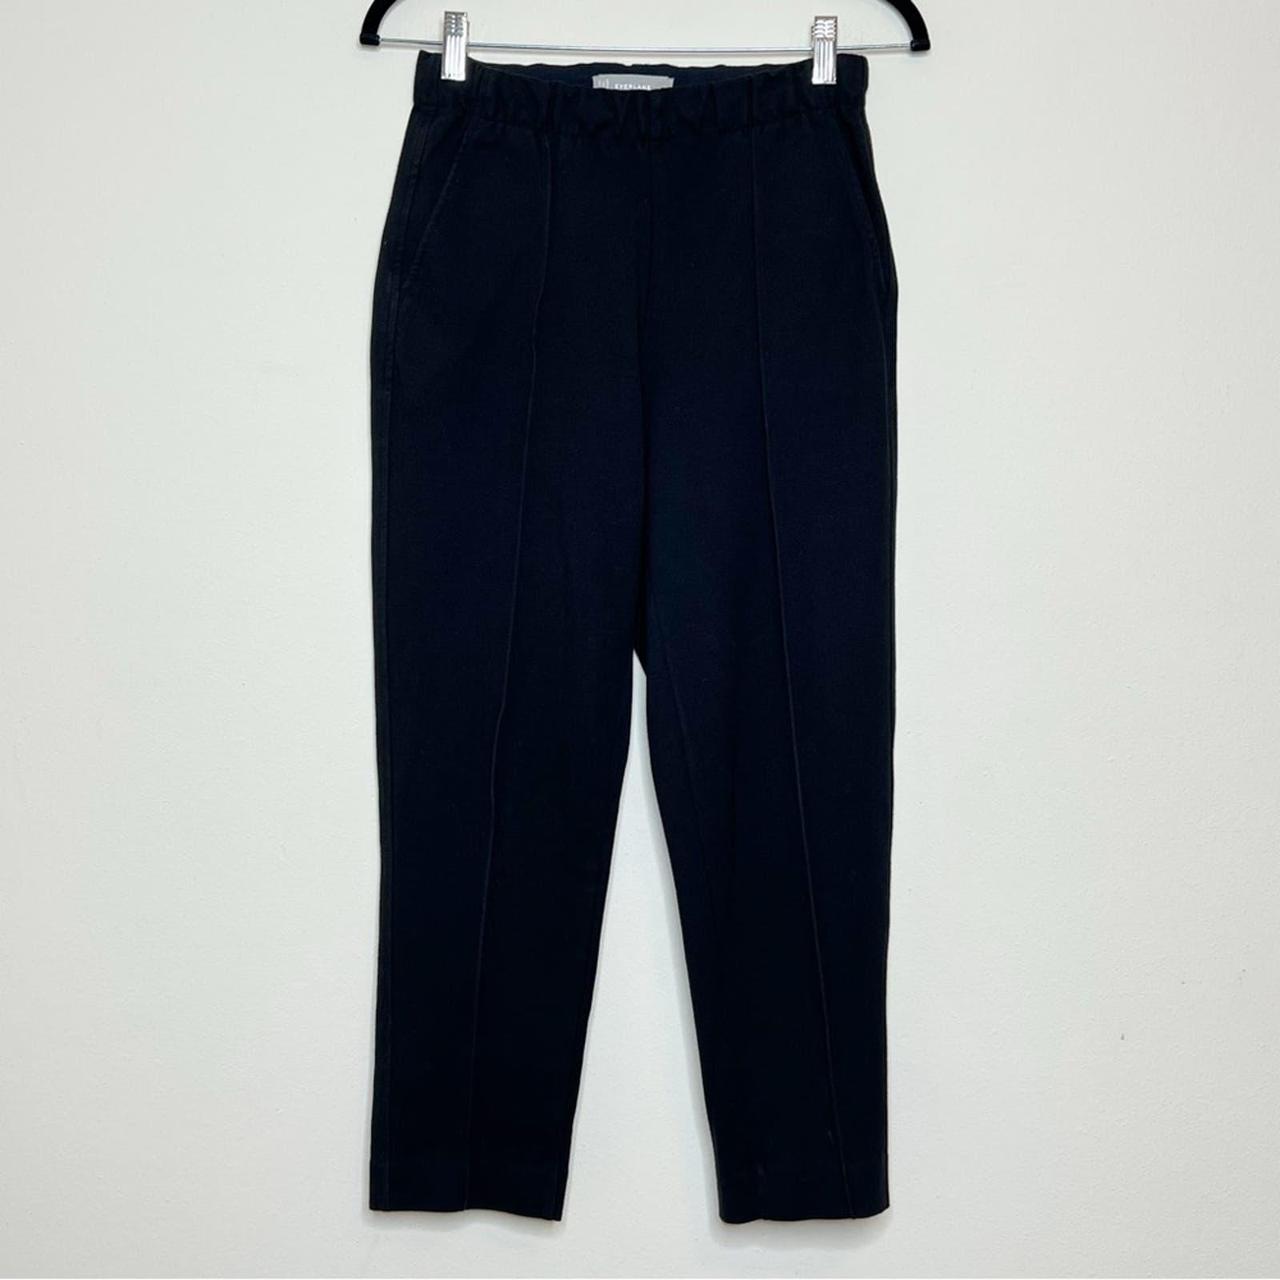 LULULEMON On The Fly Crop True Navy 23 Travel Woven Pants Size